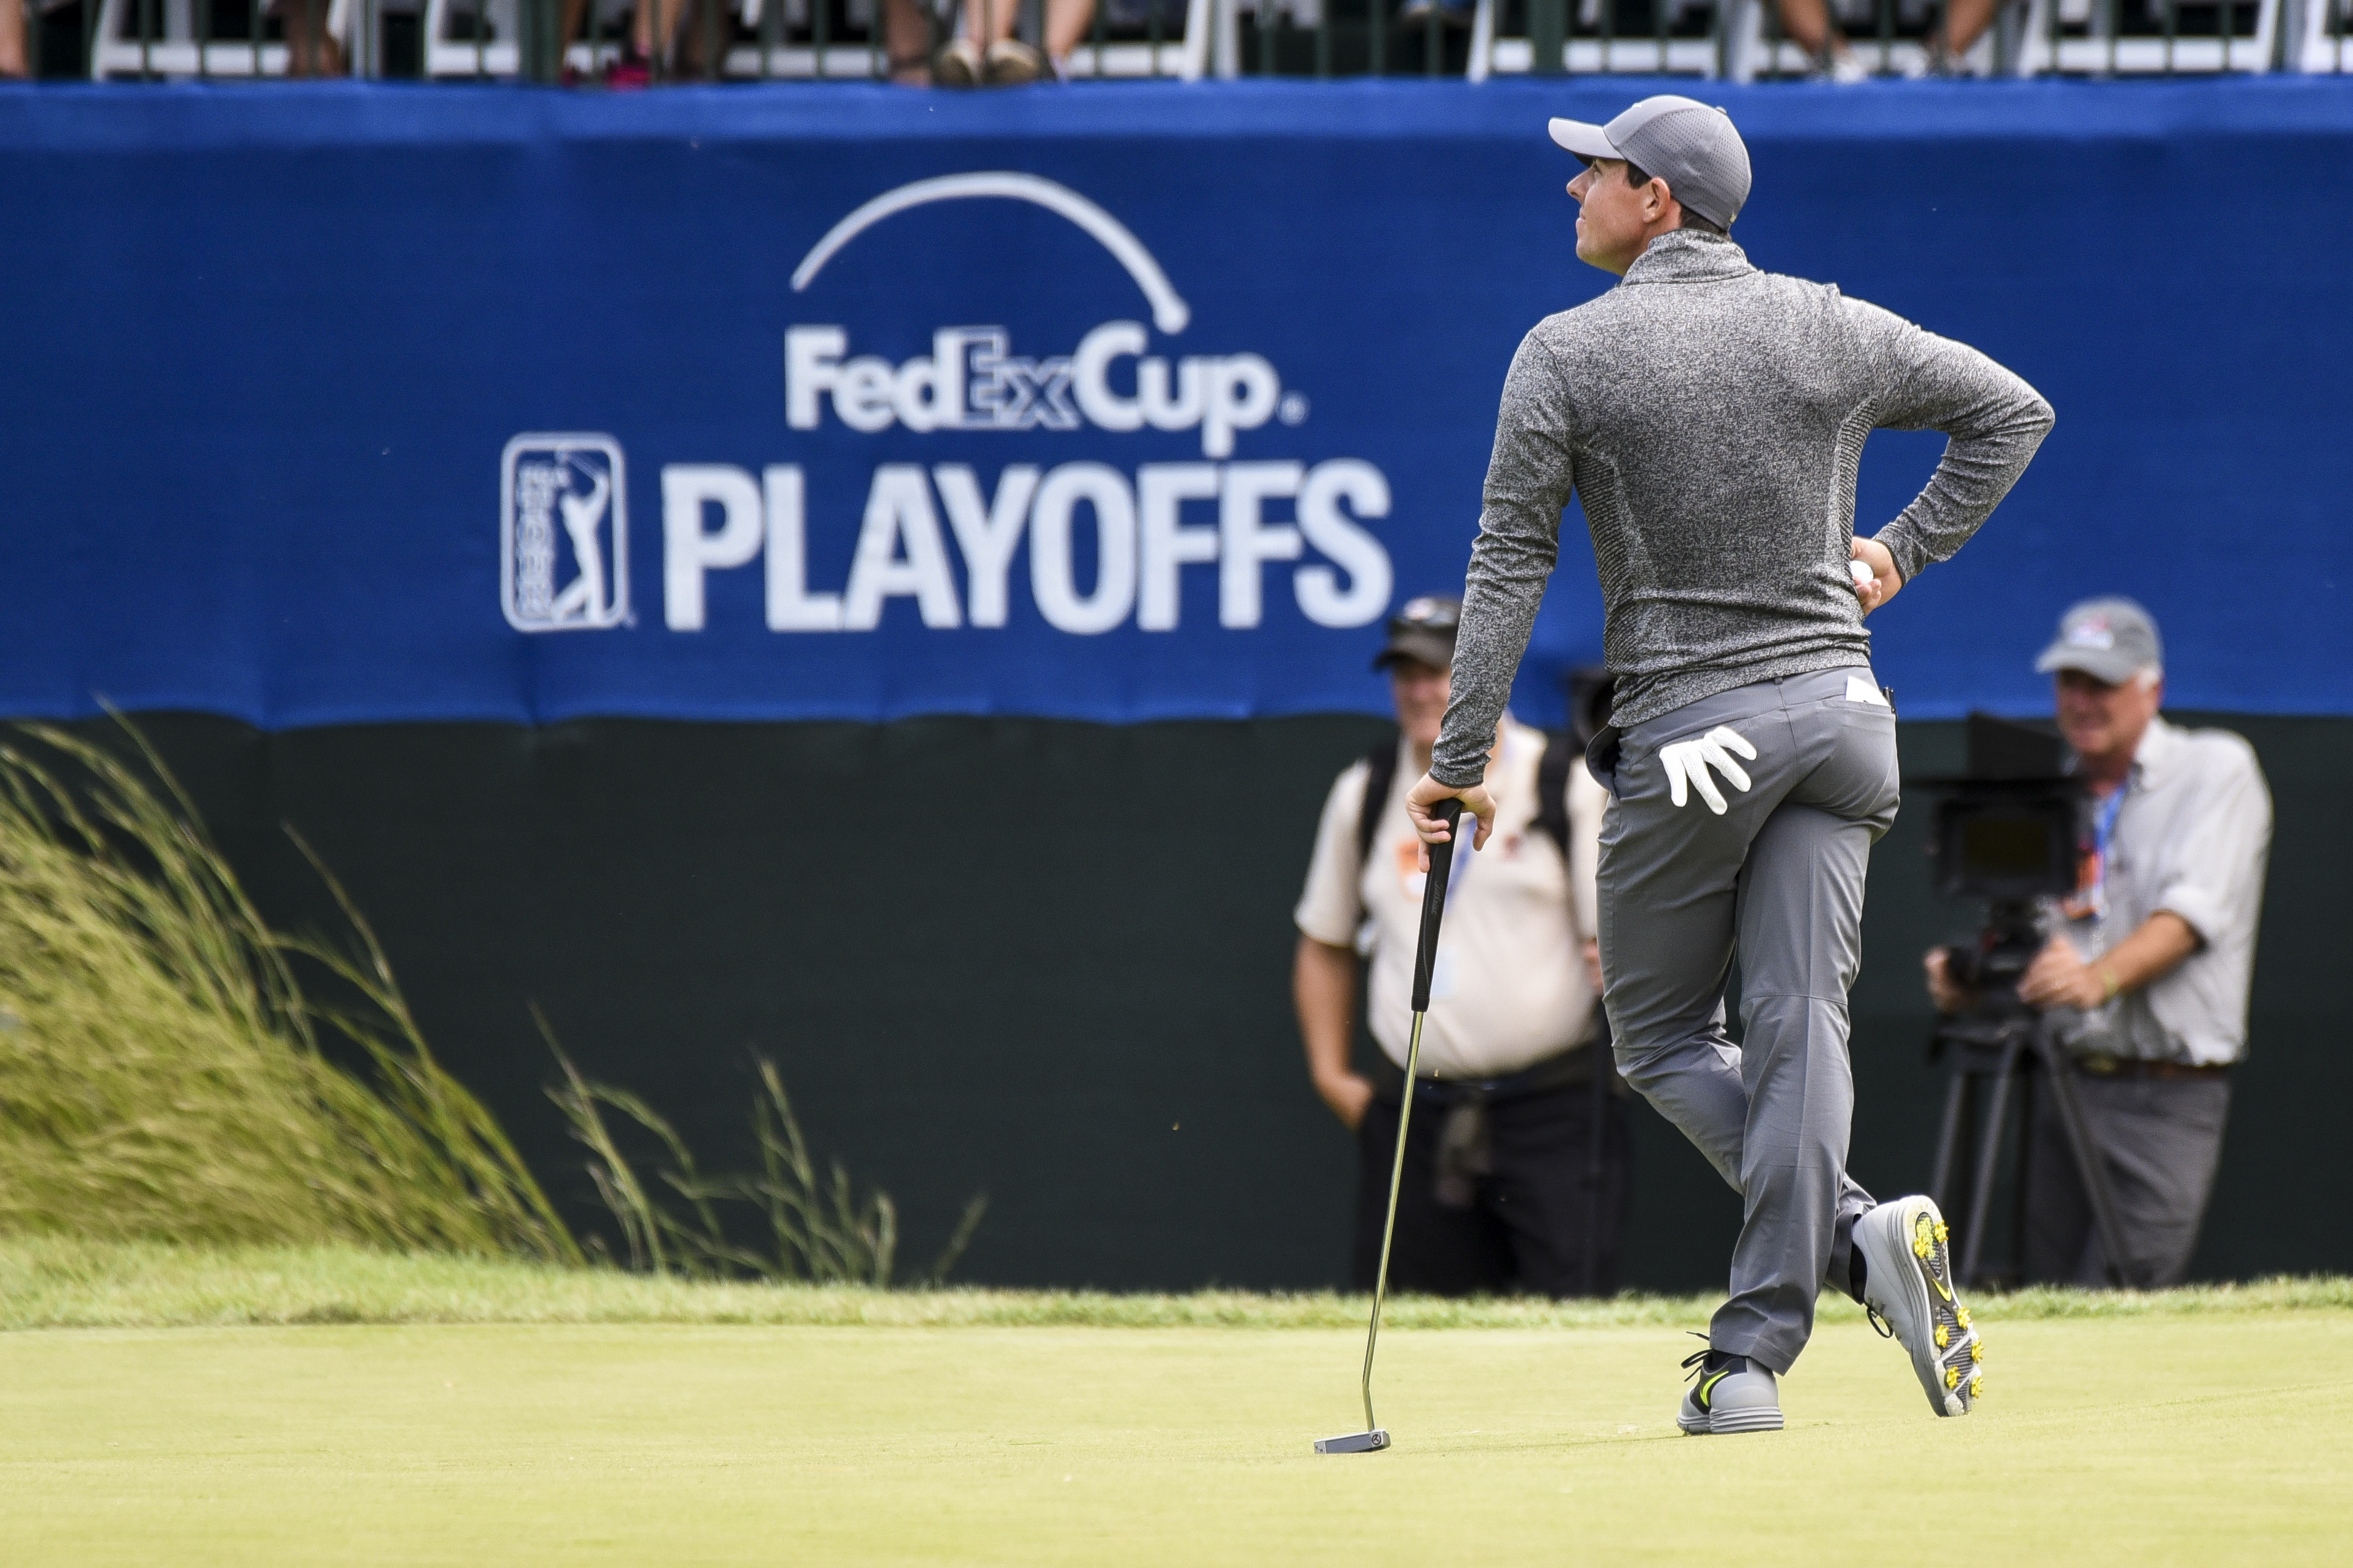 7 Players Who Can Win The FedEx Cup